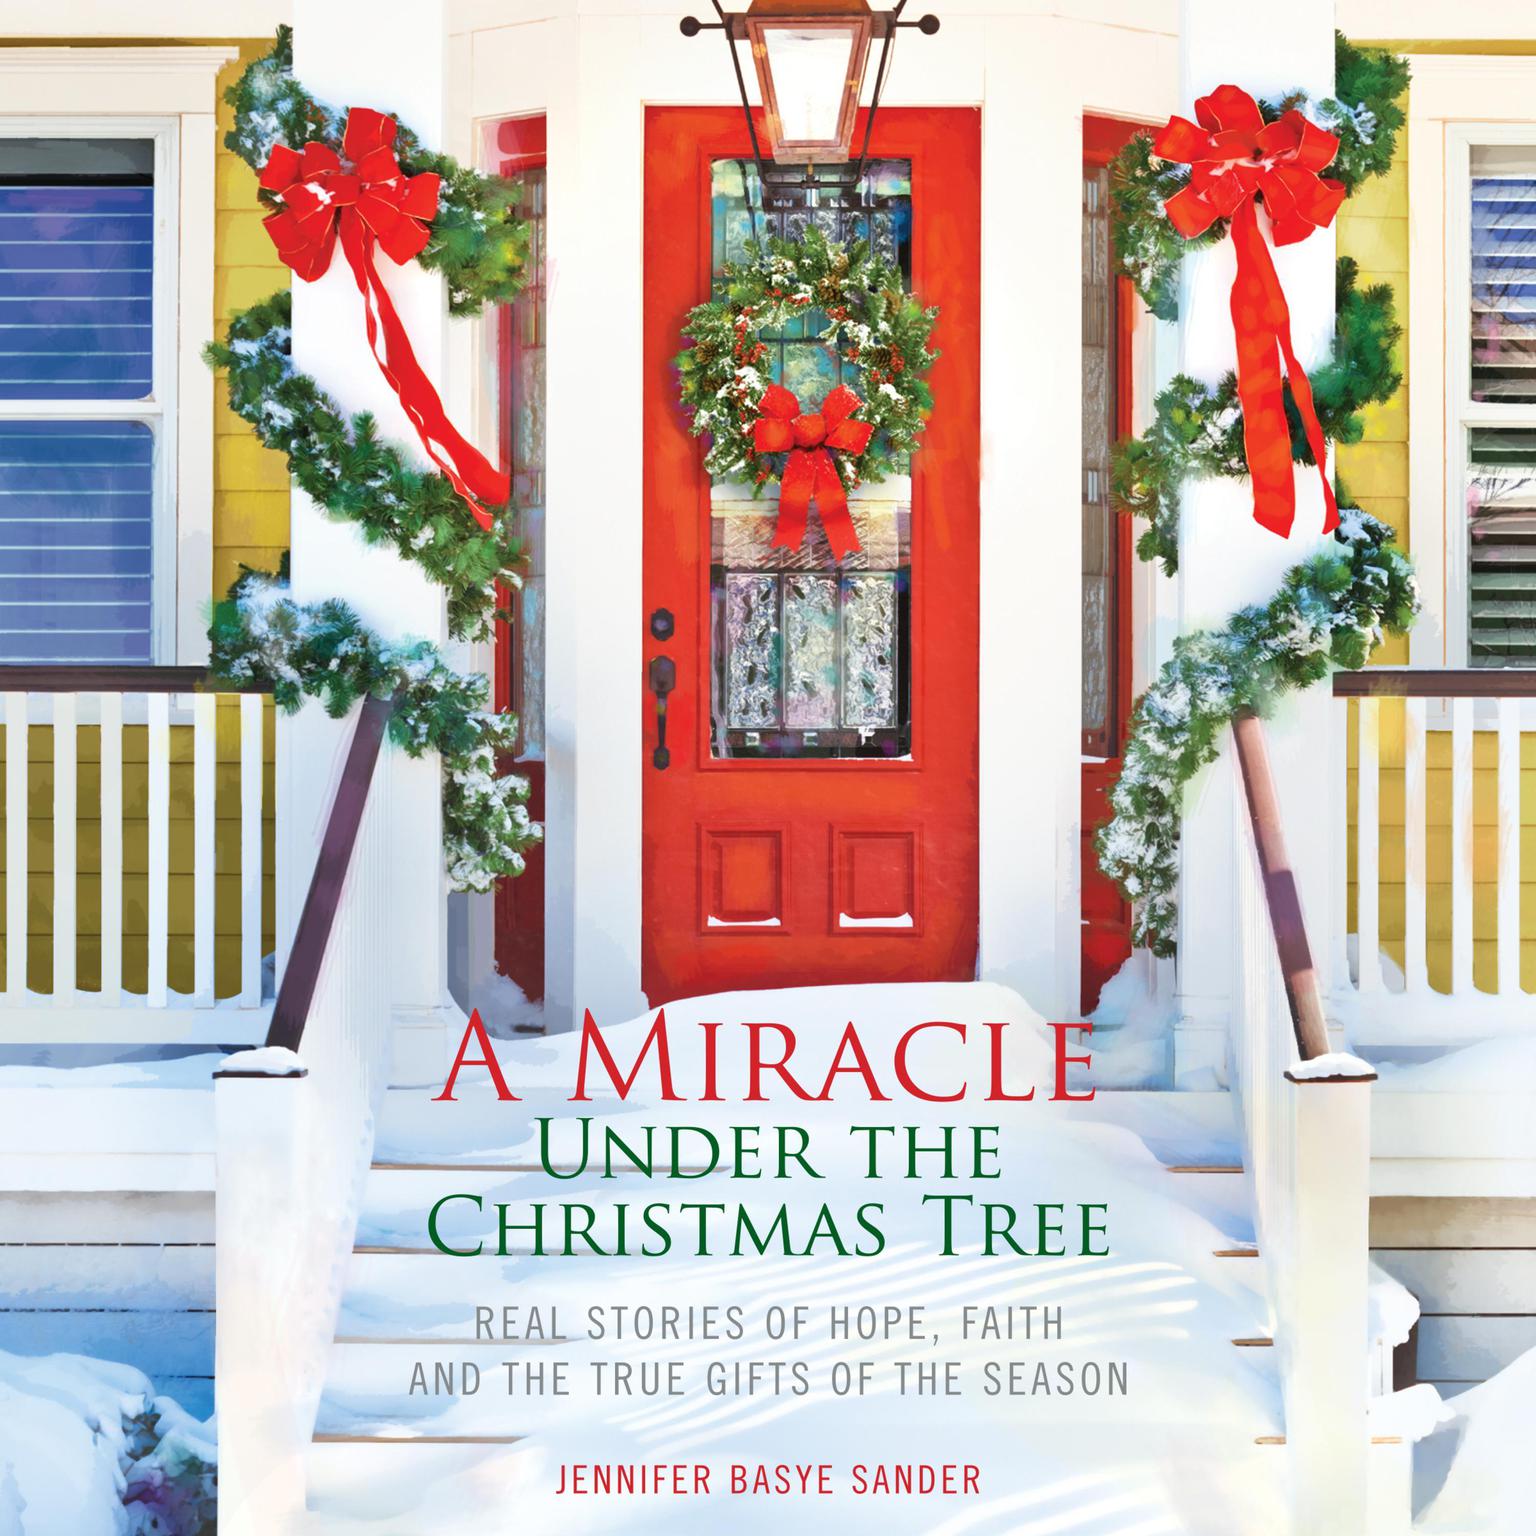 A Miracle Under the Christmas Tree: Real Stories of Hope, Faith and the True Gifts of the Season Audiobook, by Jennifer Basye Sander